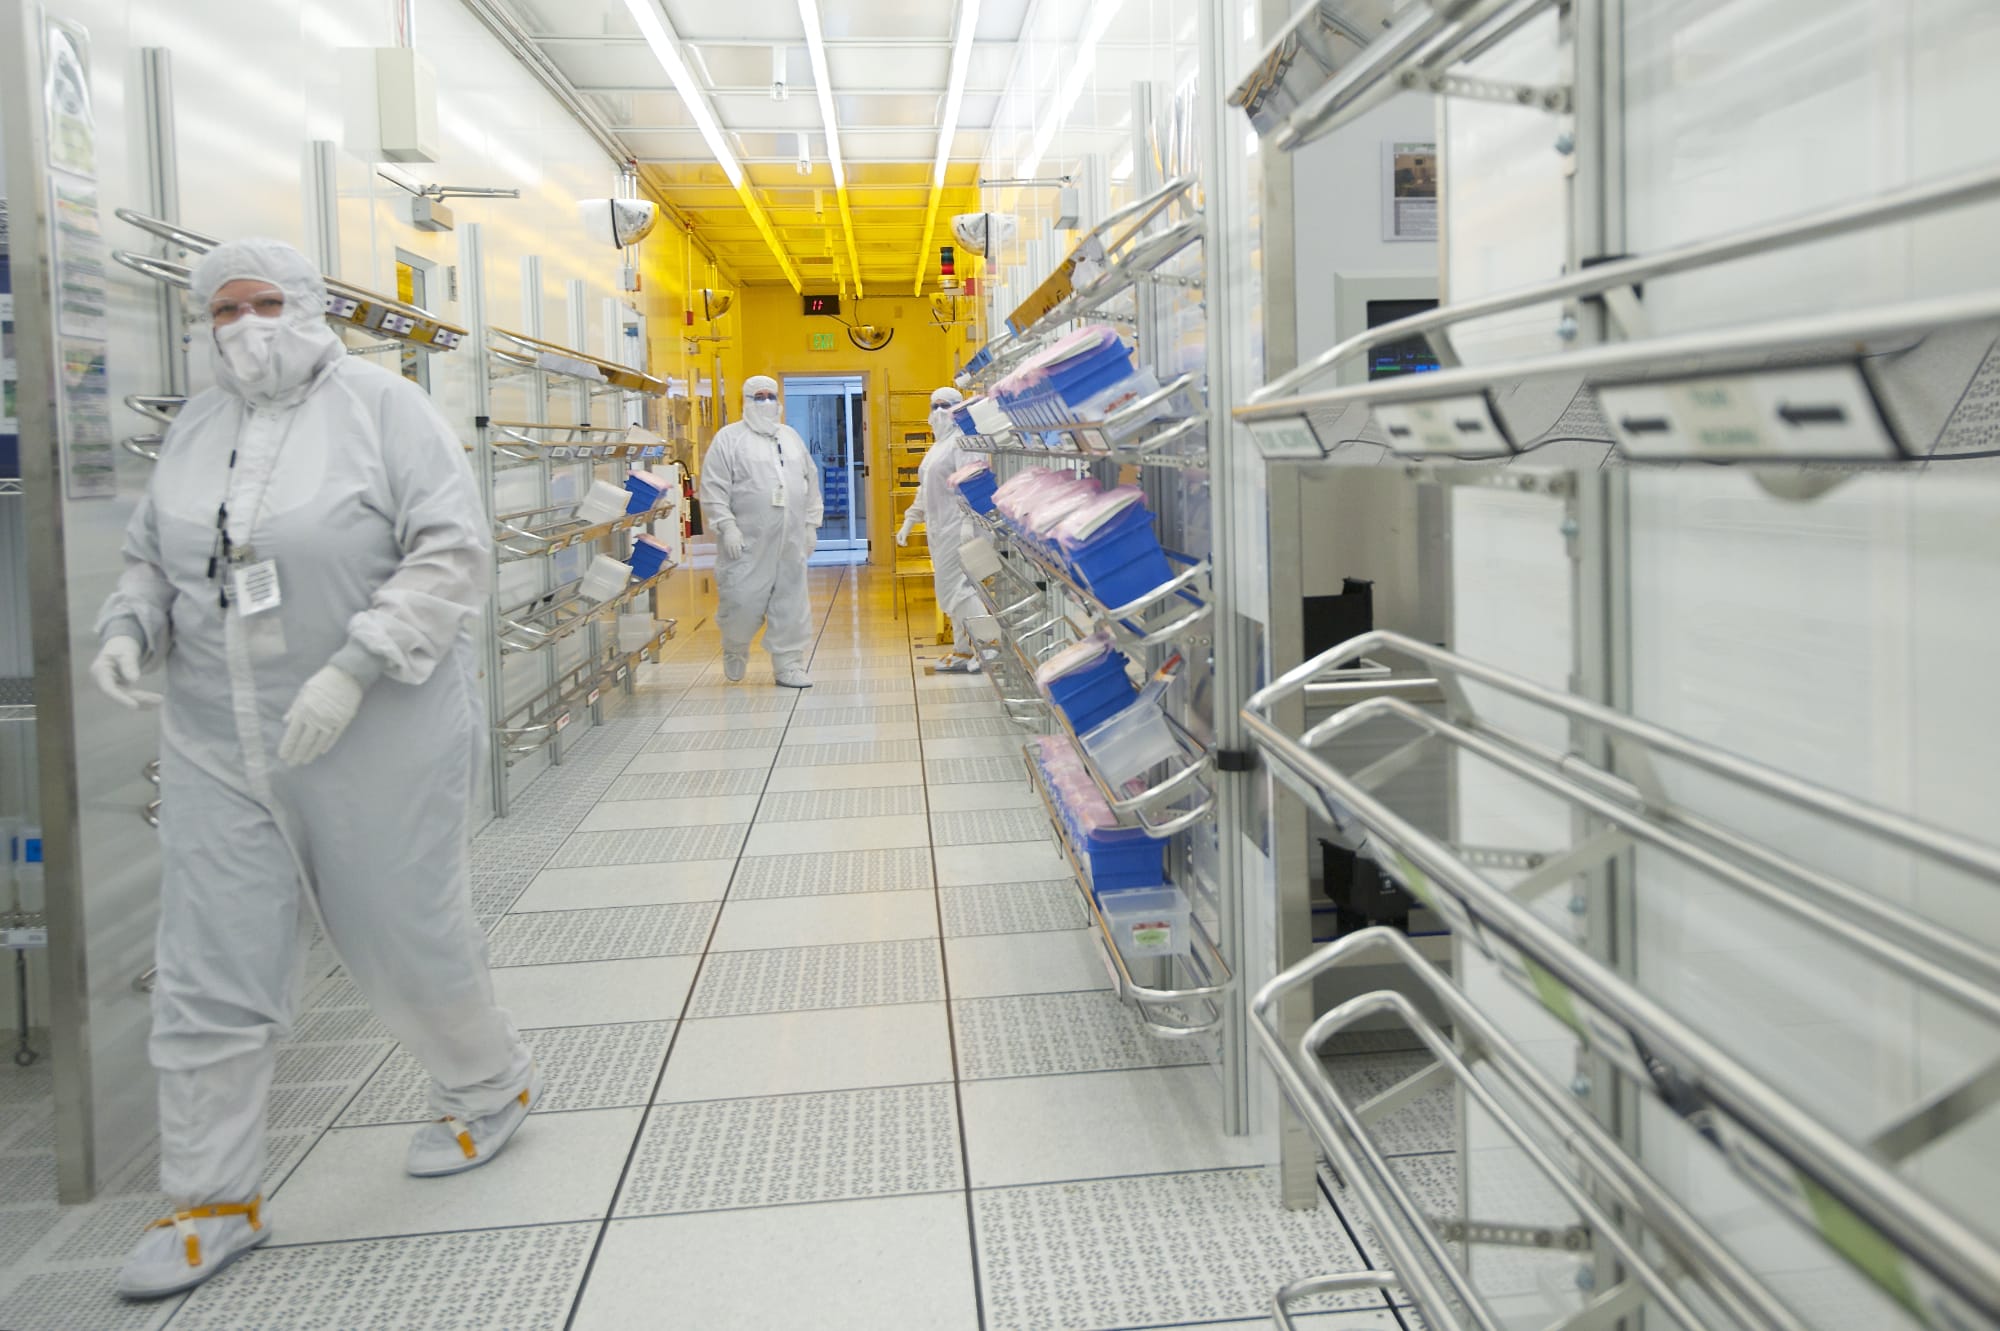 Linear Technology employees move through a corridor inside a clean room at the company's Camas manufacturing plant.